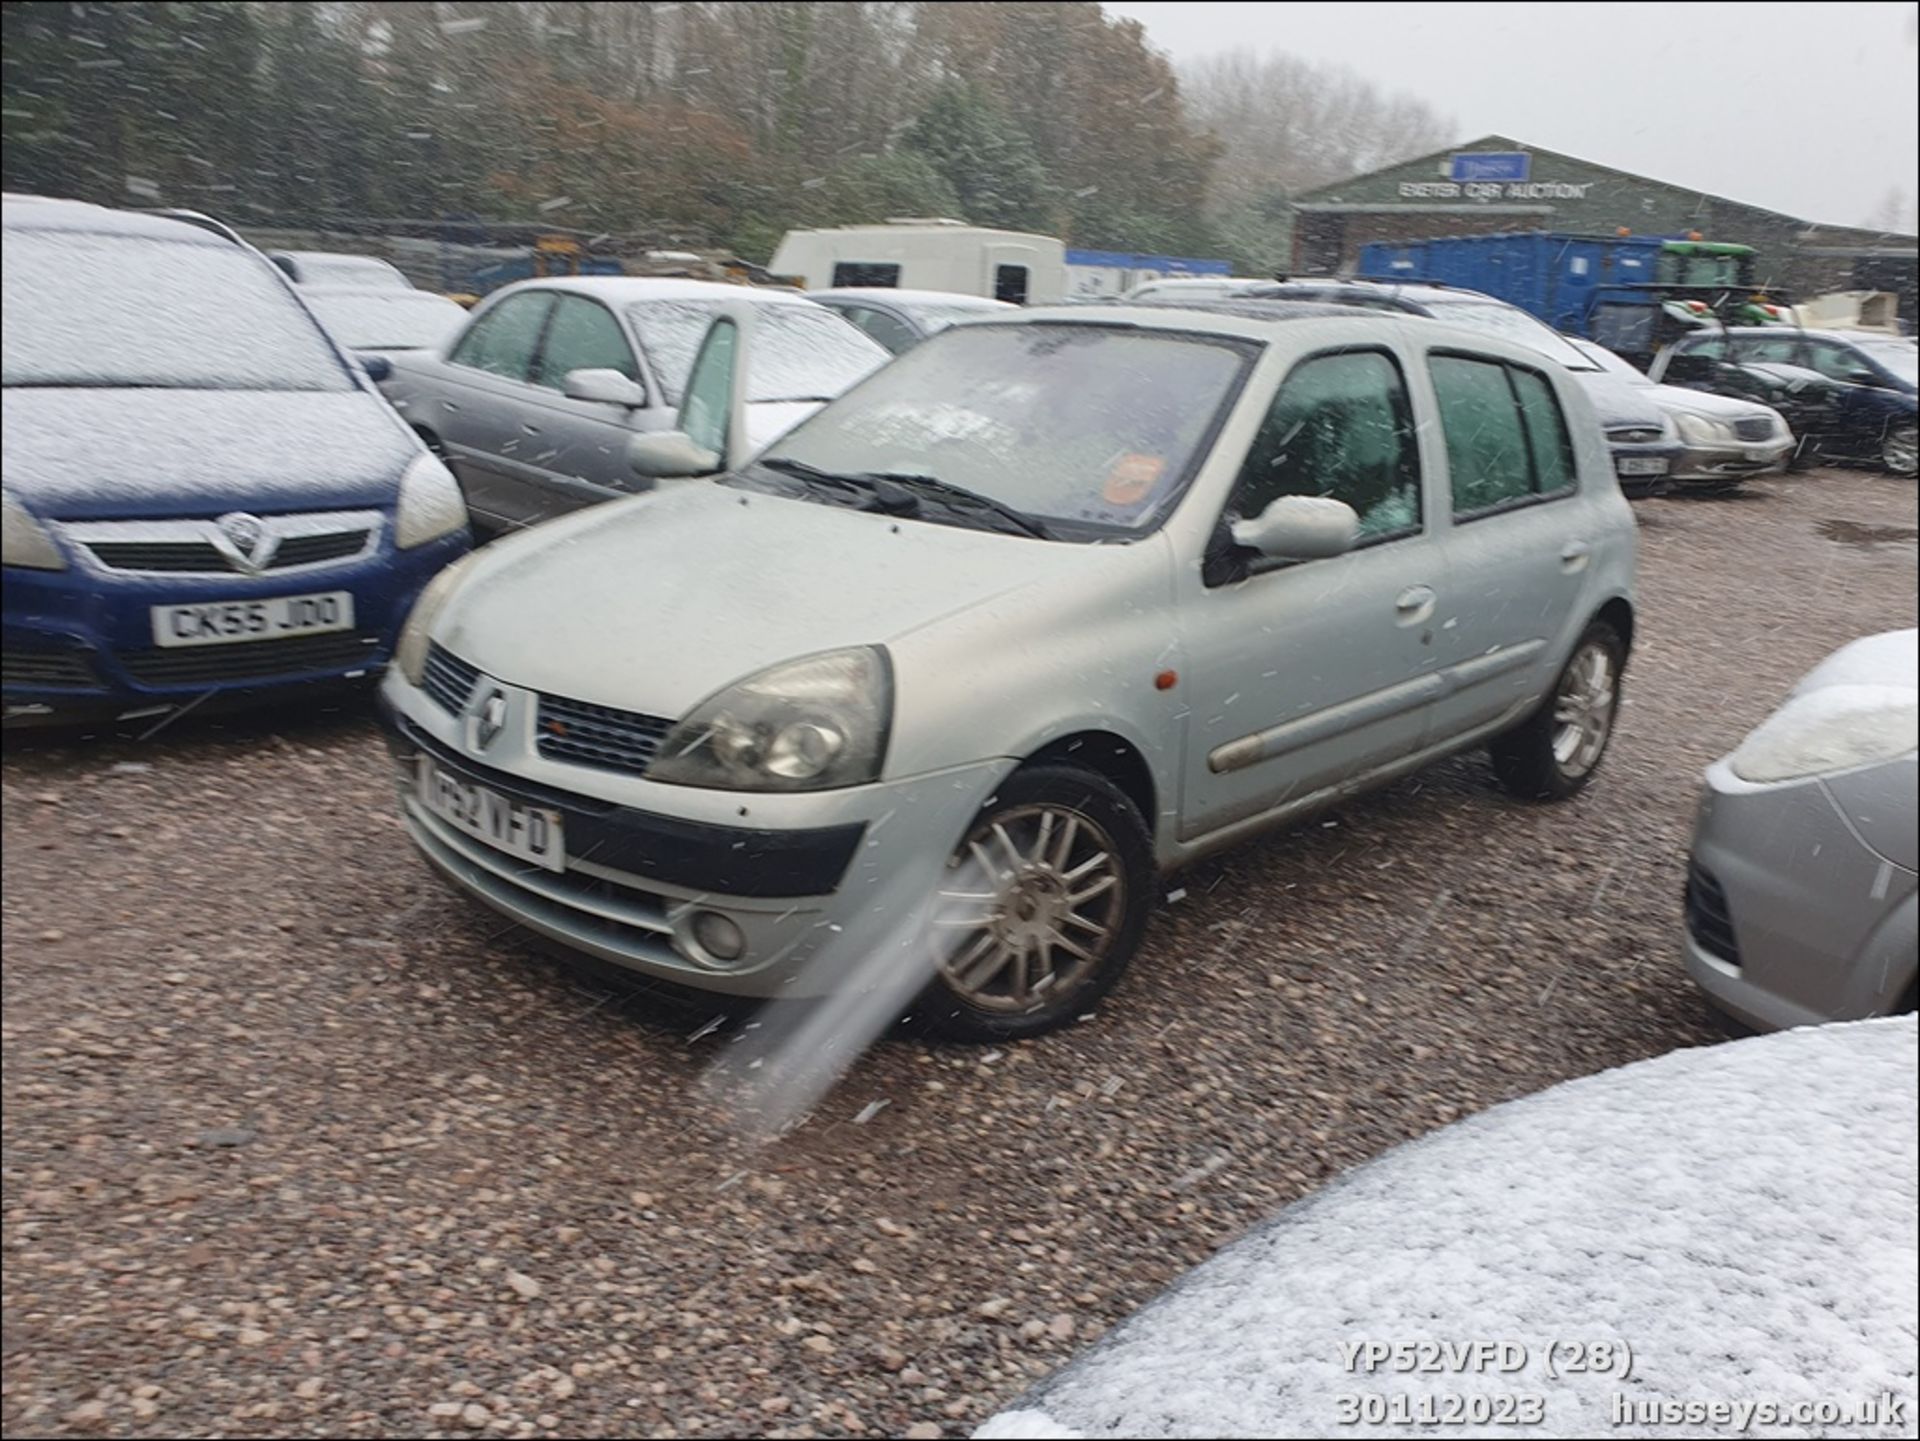 02/52 RENAULT CLIO INITIALE DCI - 1461cc 5dr Hatchback (Silver, 154k) - Image 29 of 48